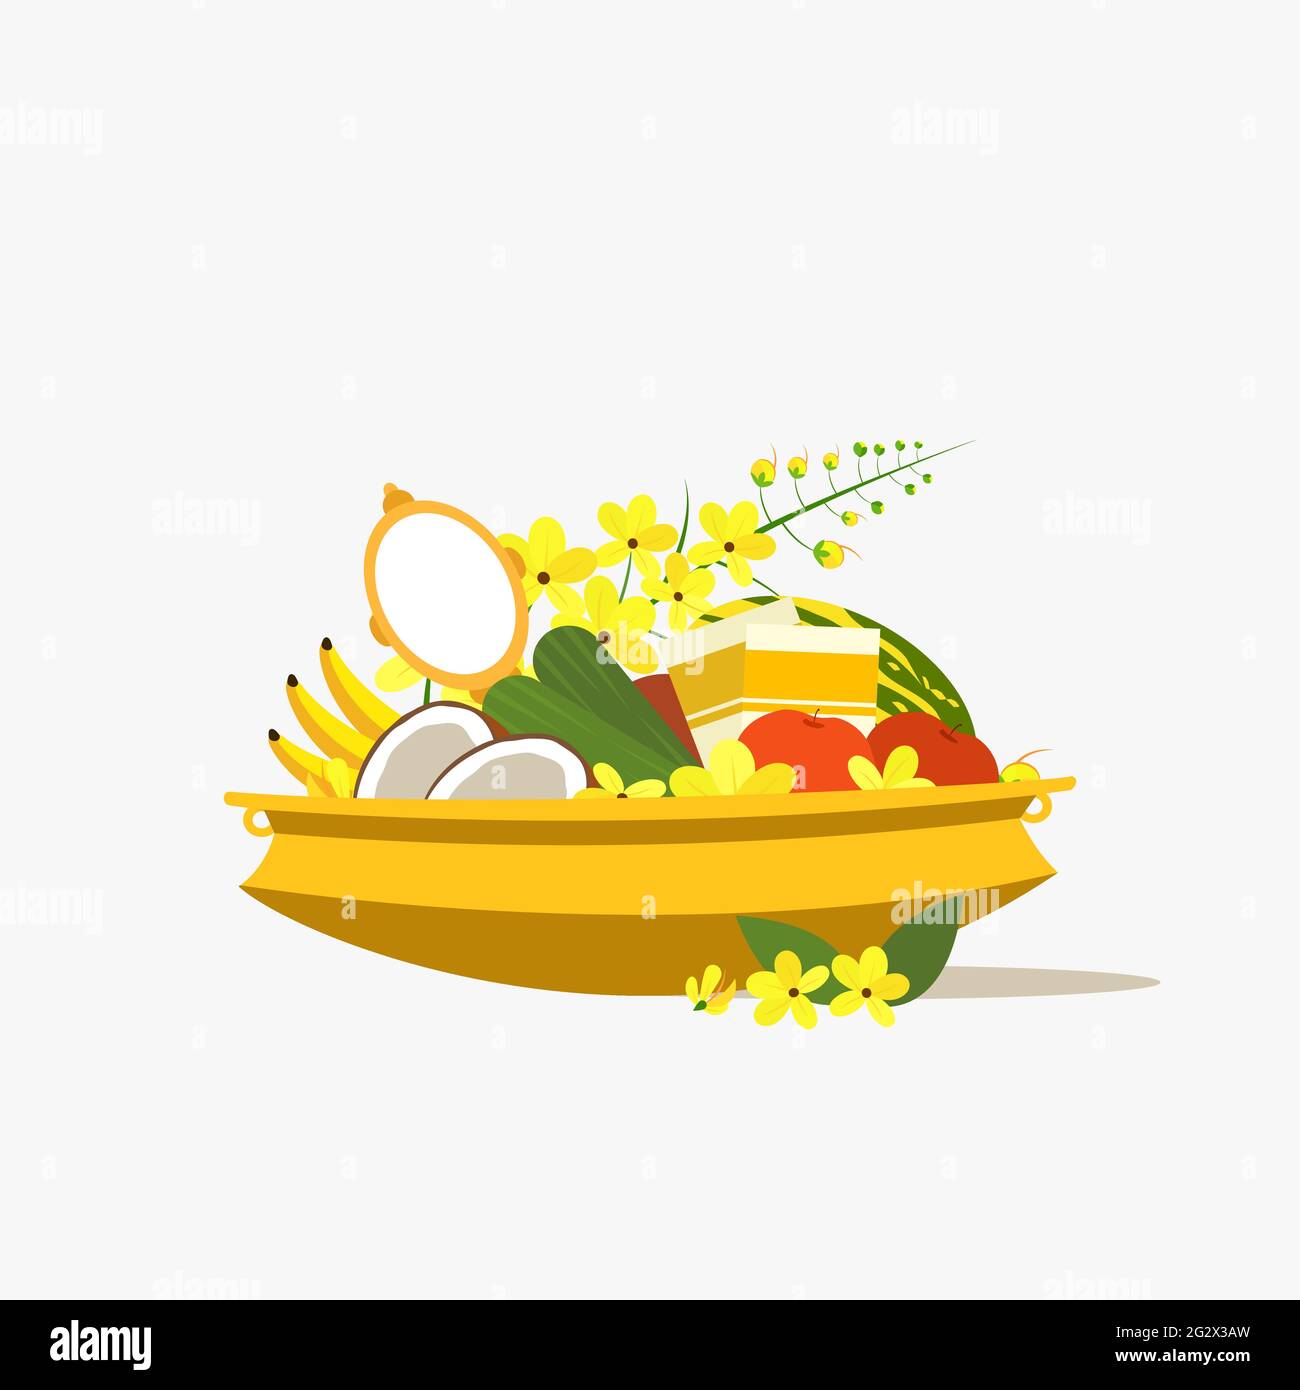 Vishu Kani' an assortment of fruits, vegetables and other ...